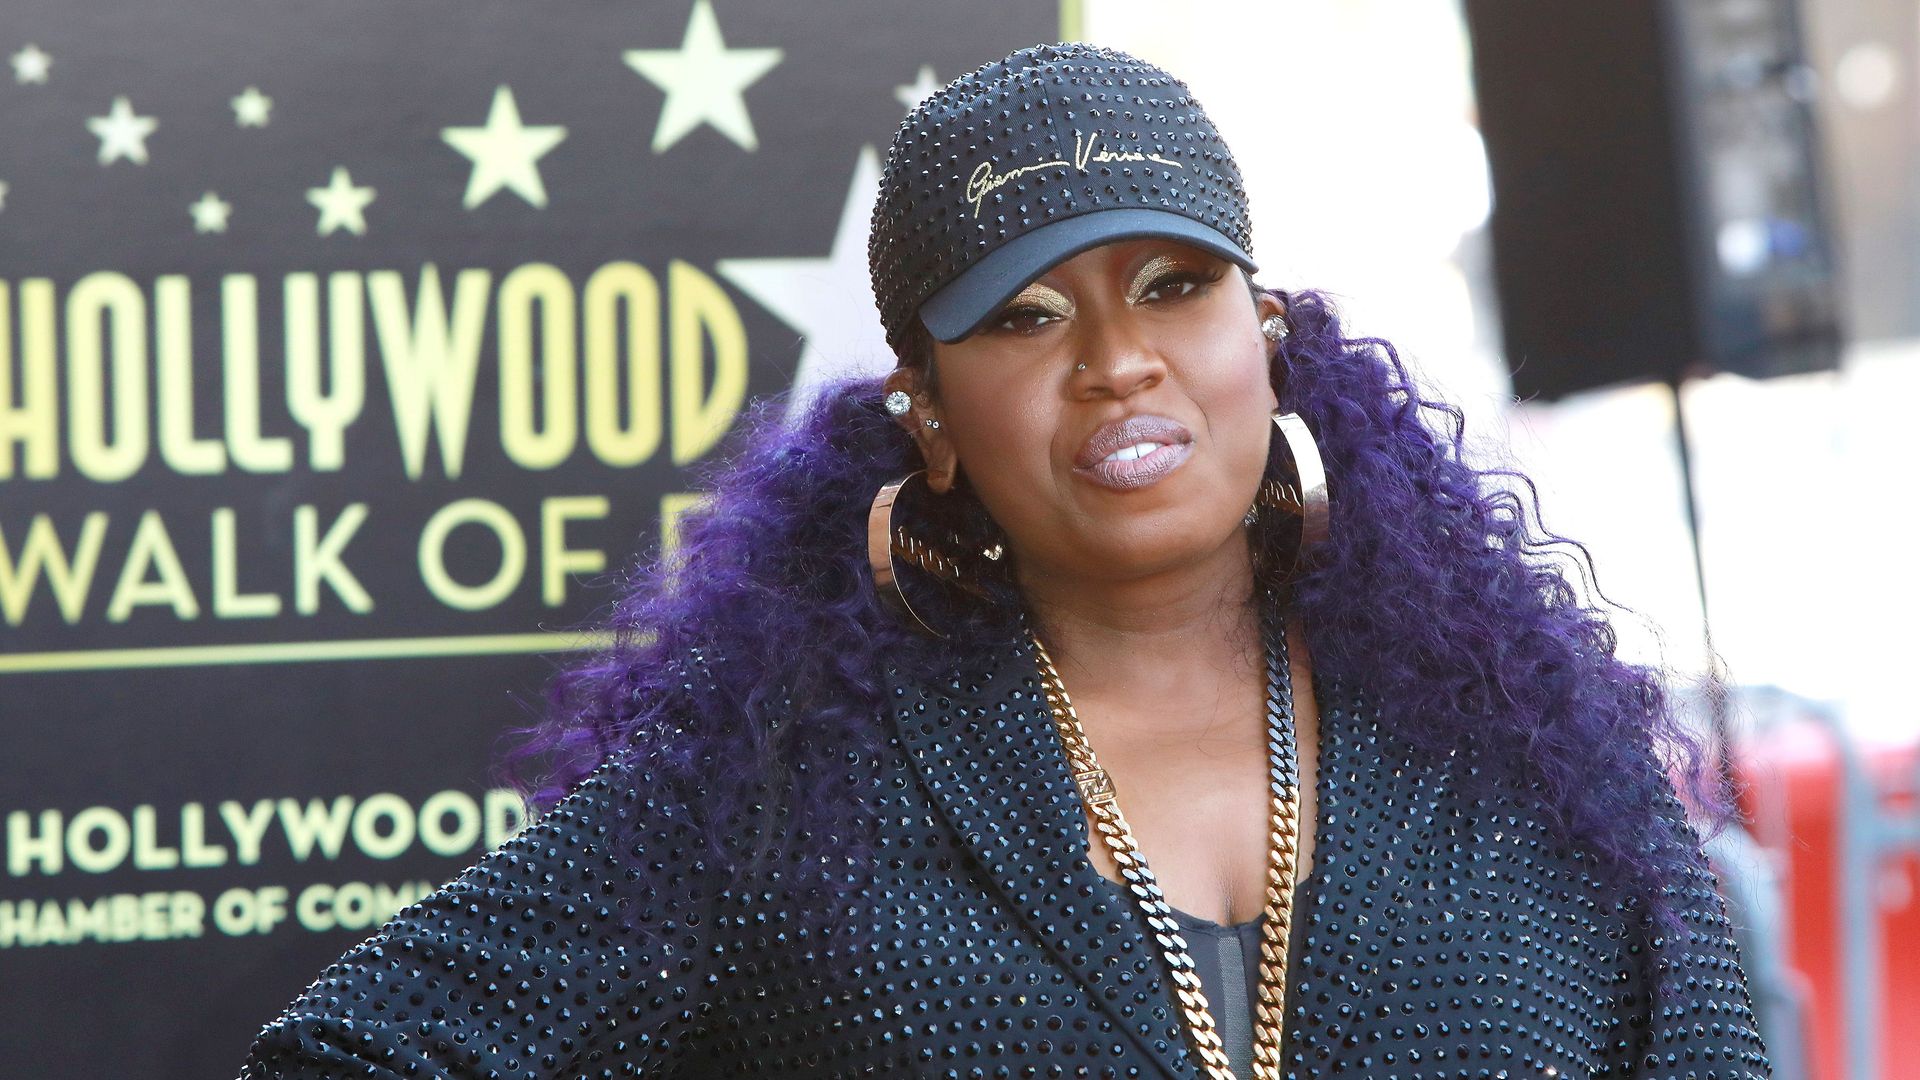 Missy Elliott during a ceremony as she is honored with the 2708th star on the Hollywood Walk of Fame 